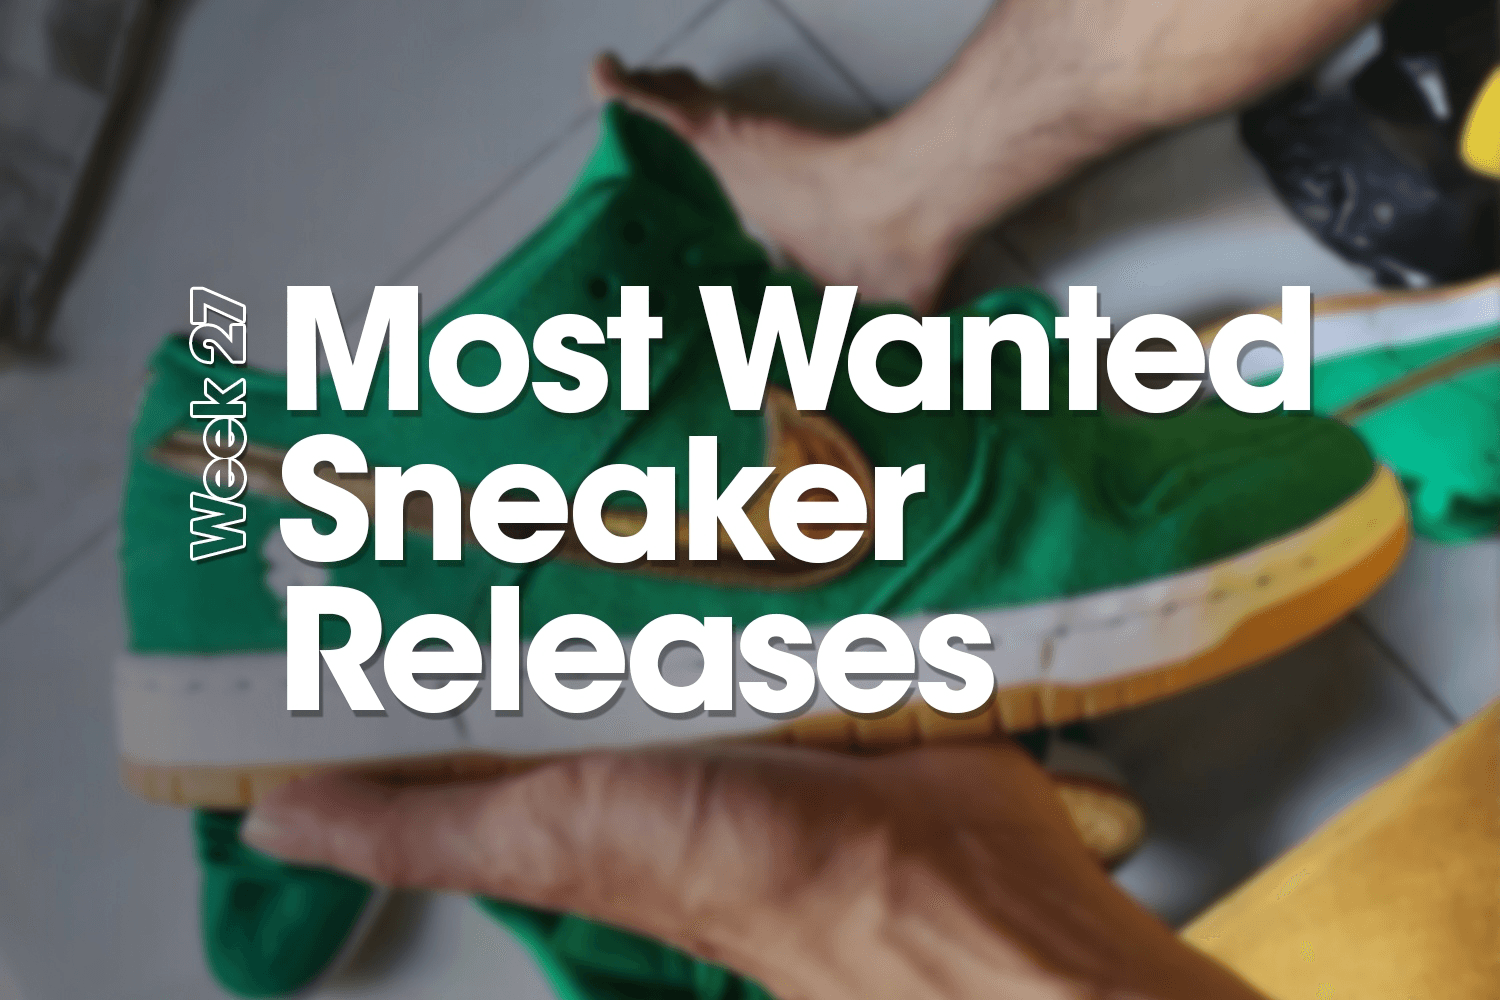 Most Wanted Sneaker Releases - Woche 27